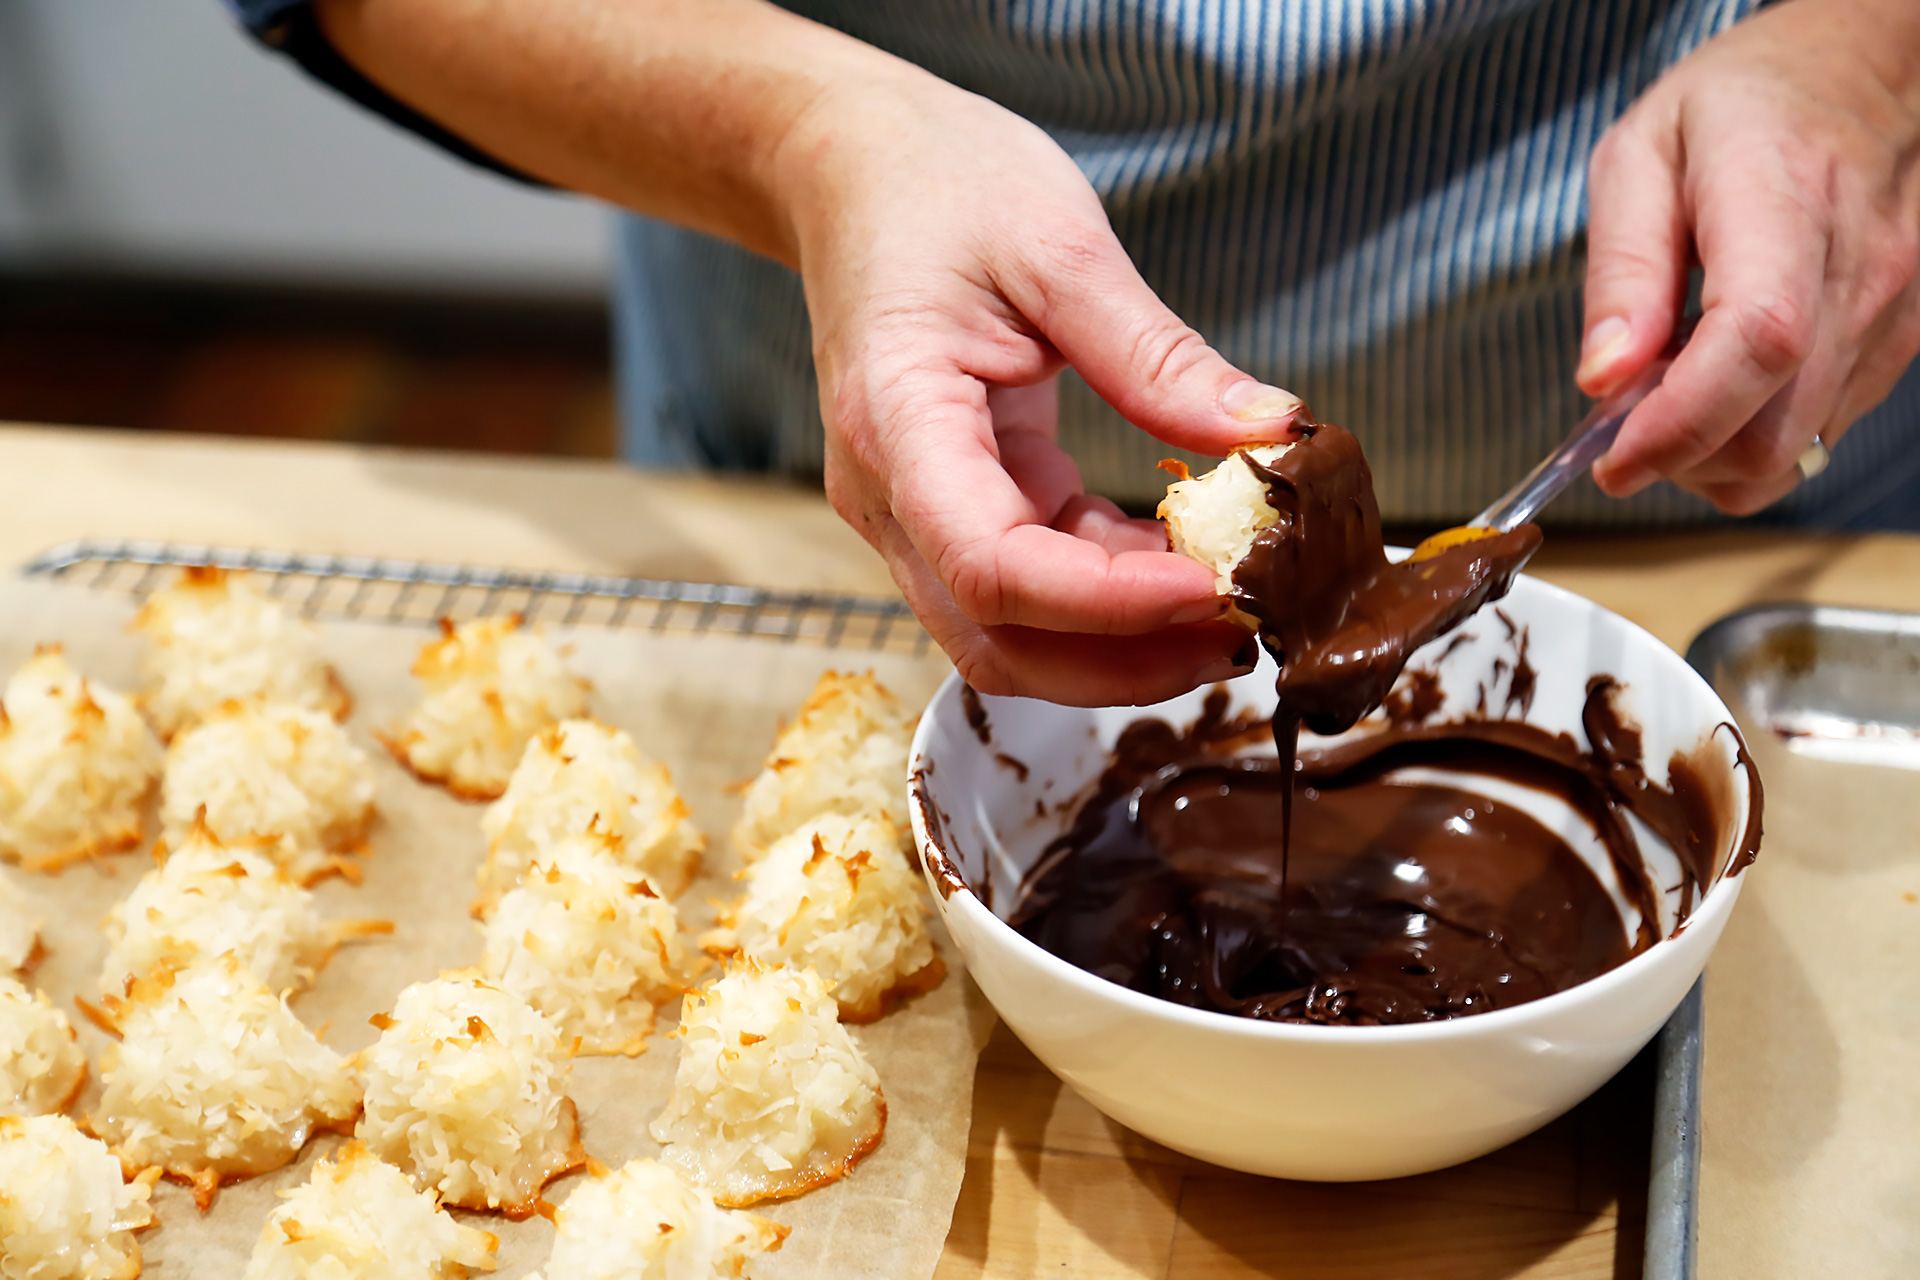 Dip the bottom of each macaroon into the melted chocolate (scraping any excess off with a little rubber spatula or a spoon if you like) then place, chocolate side down, on the baking sheet.